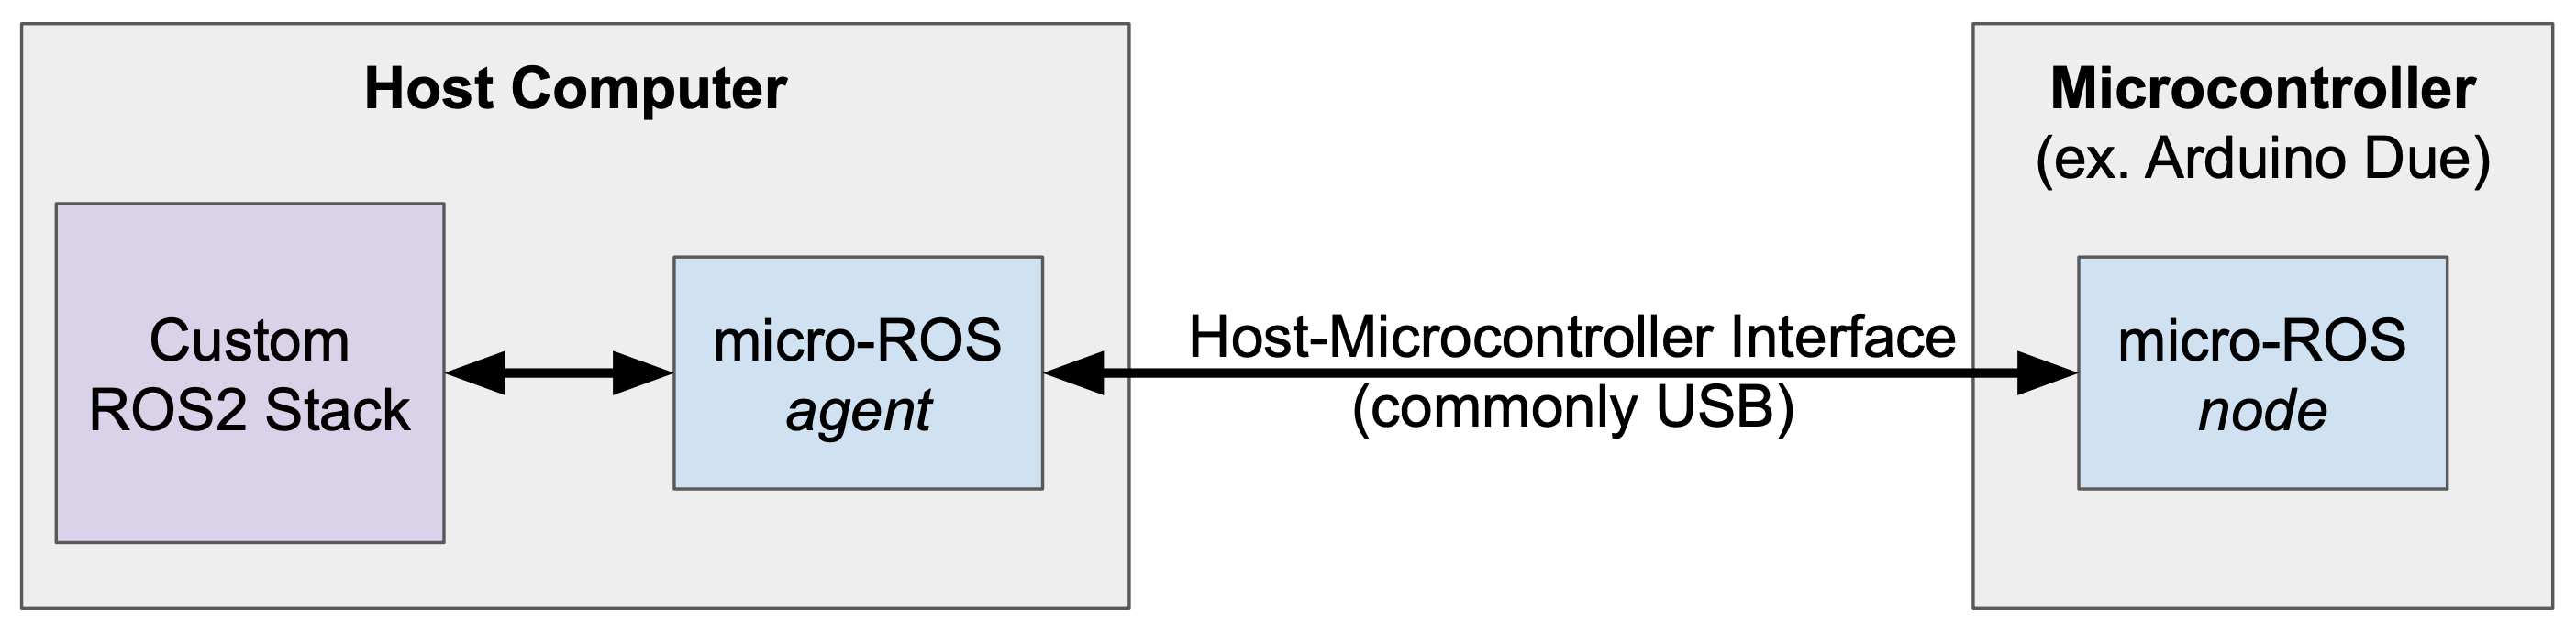 Simplified micro-ROS architecture